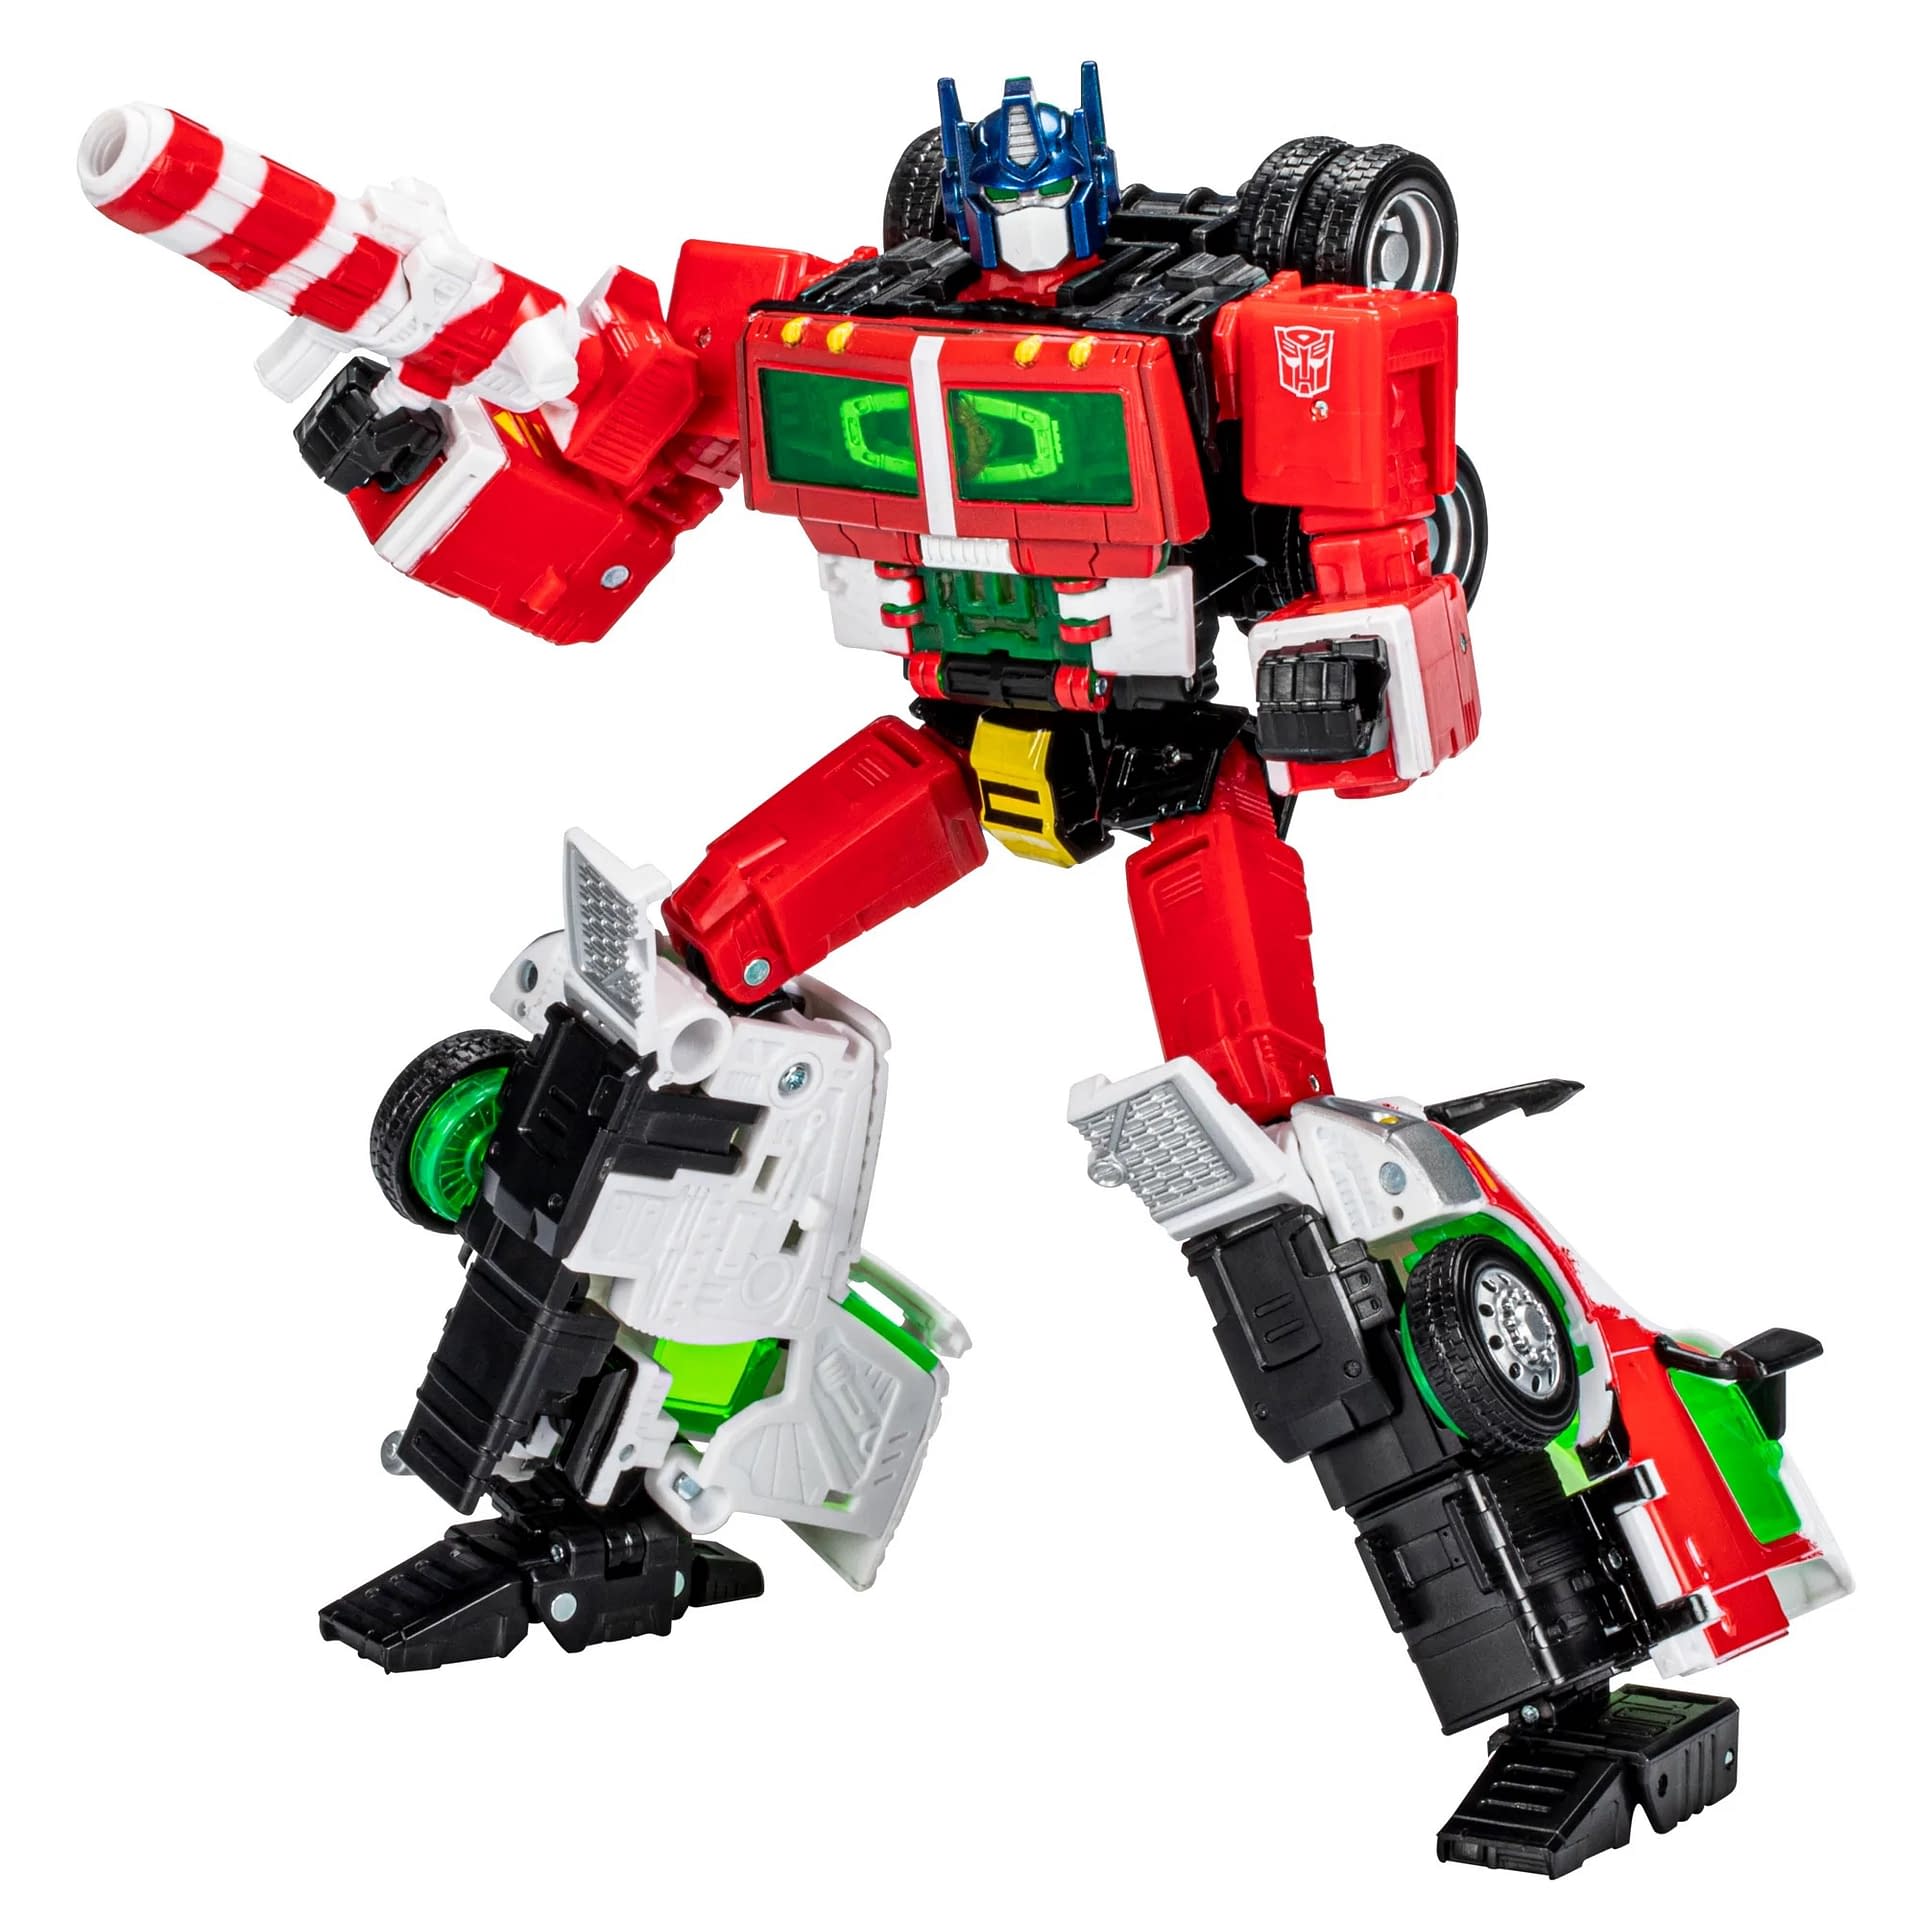 Transformers Optimus Prime Gets a Holiday Makeover with Hasbro 